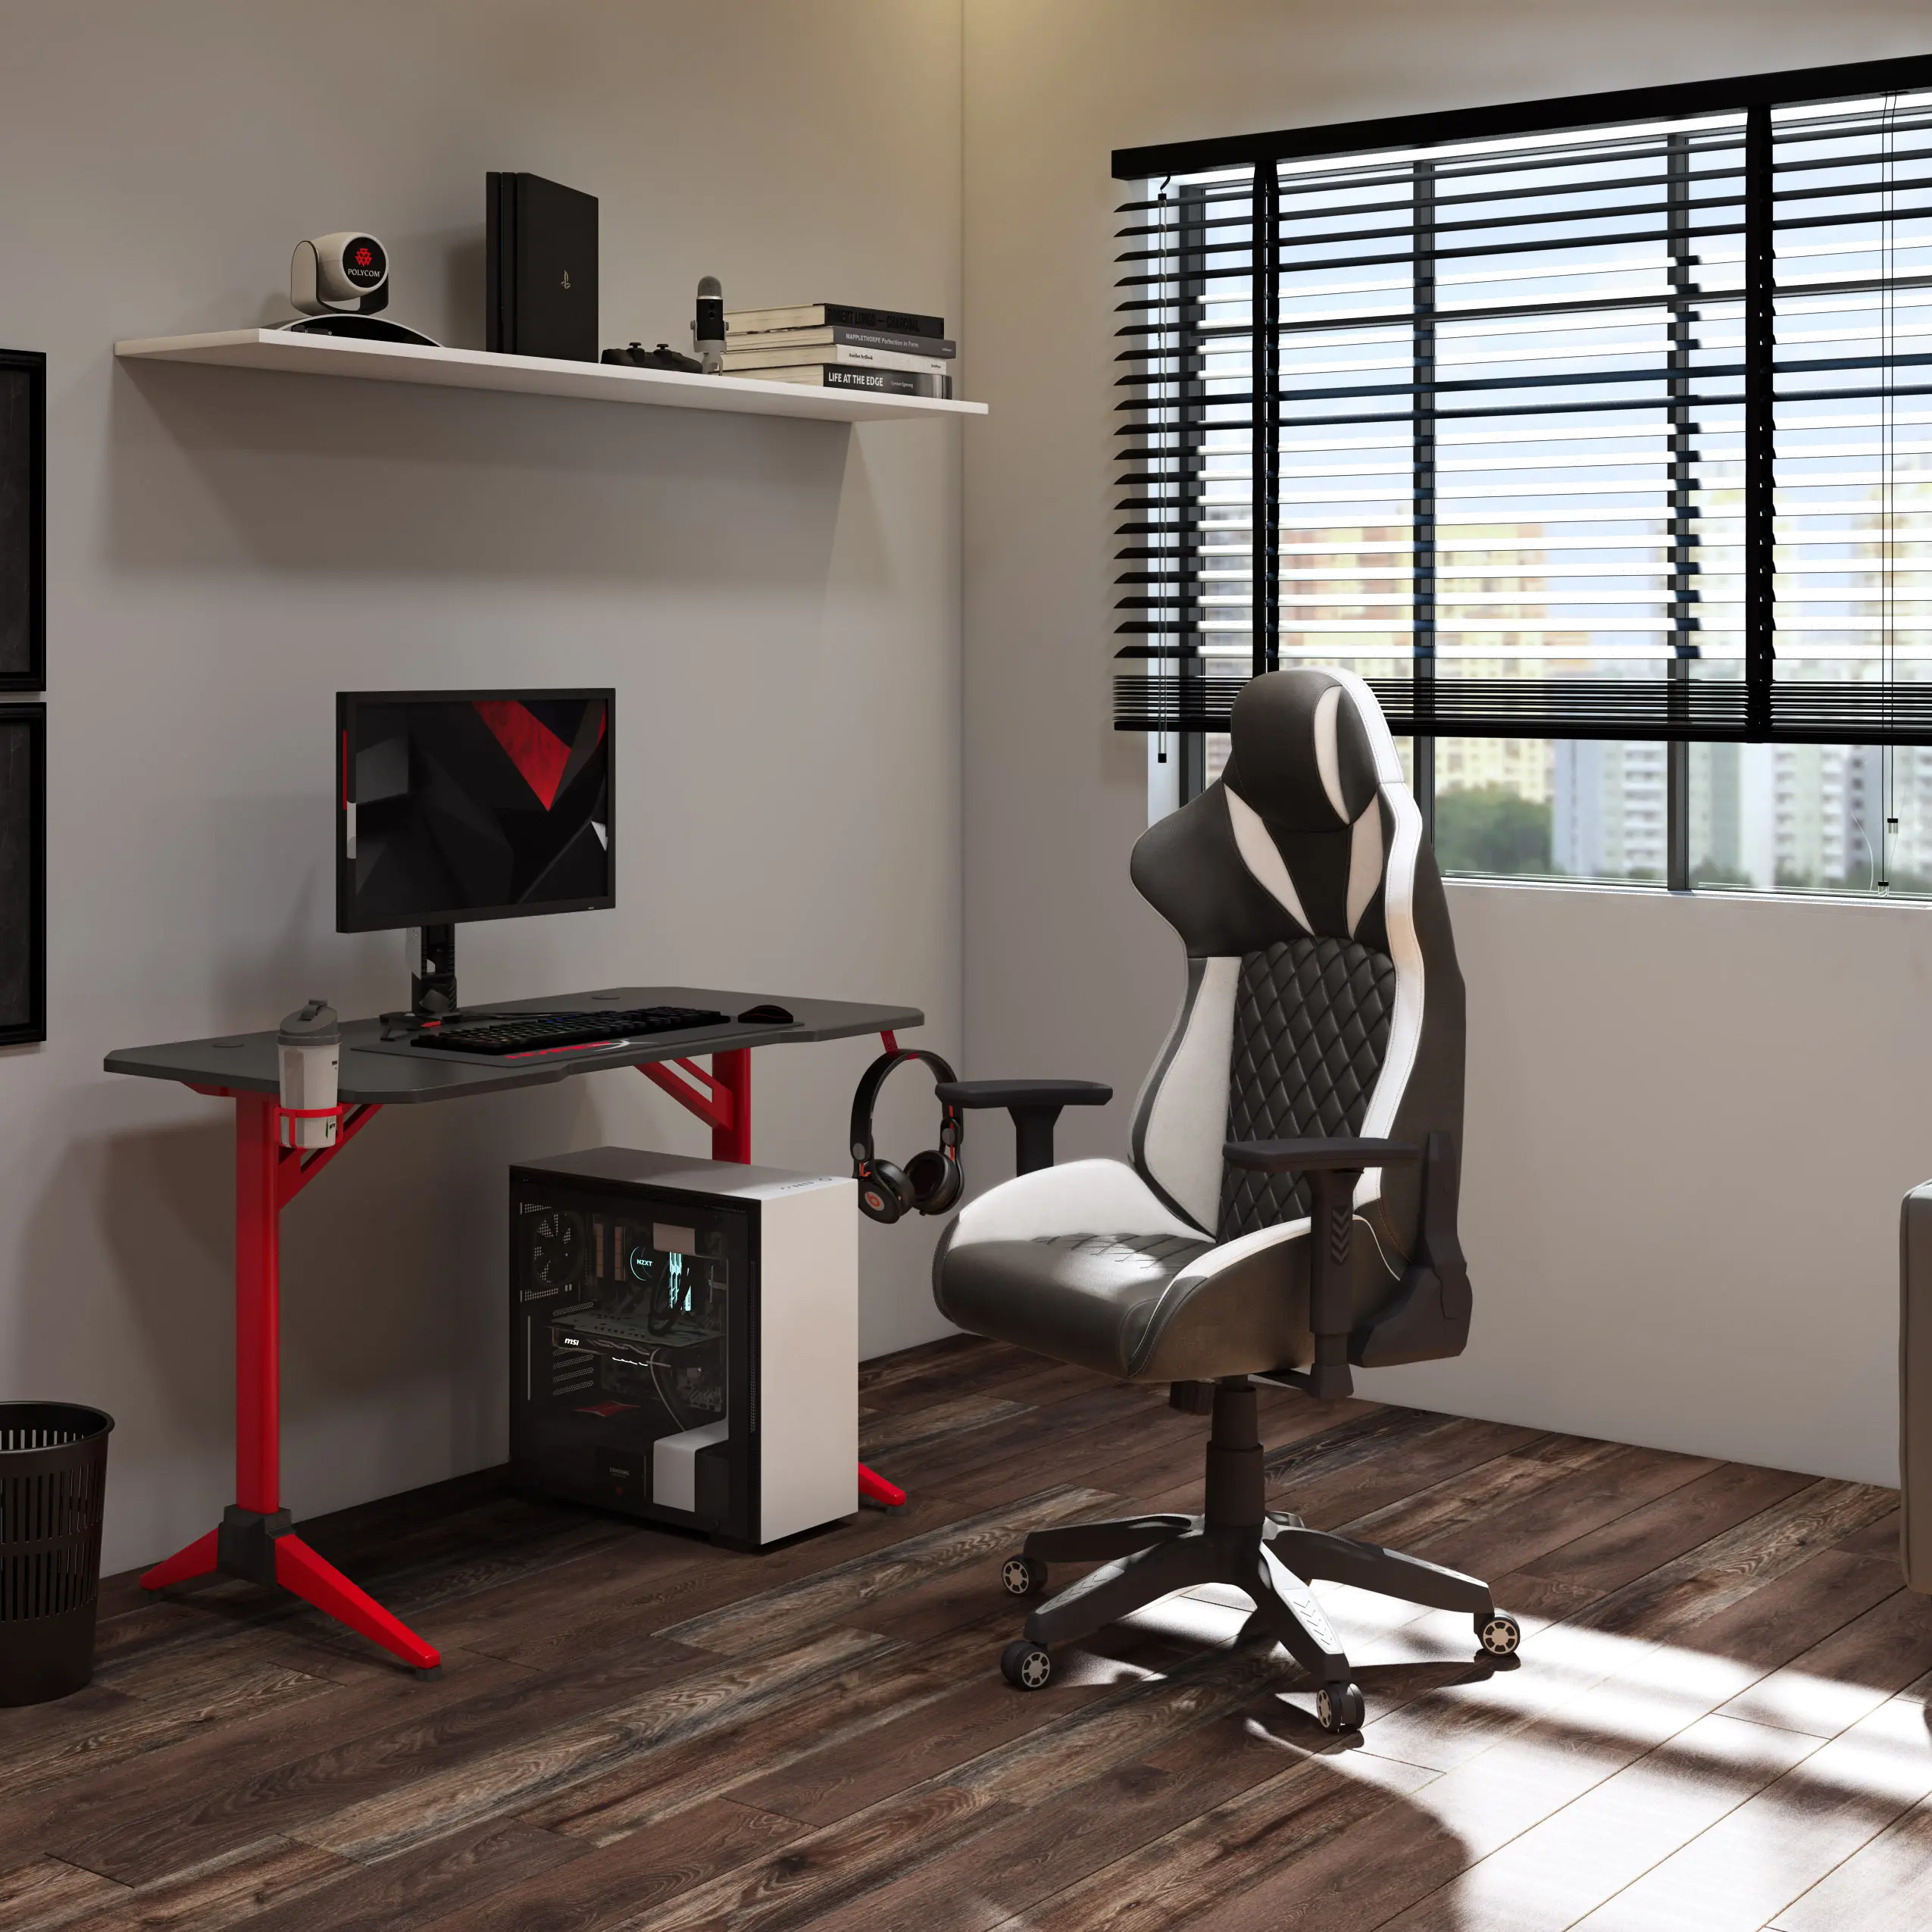 Nightshade Black and White Gaming Chair